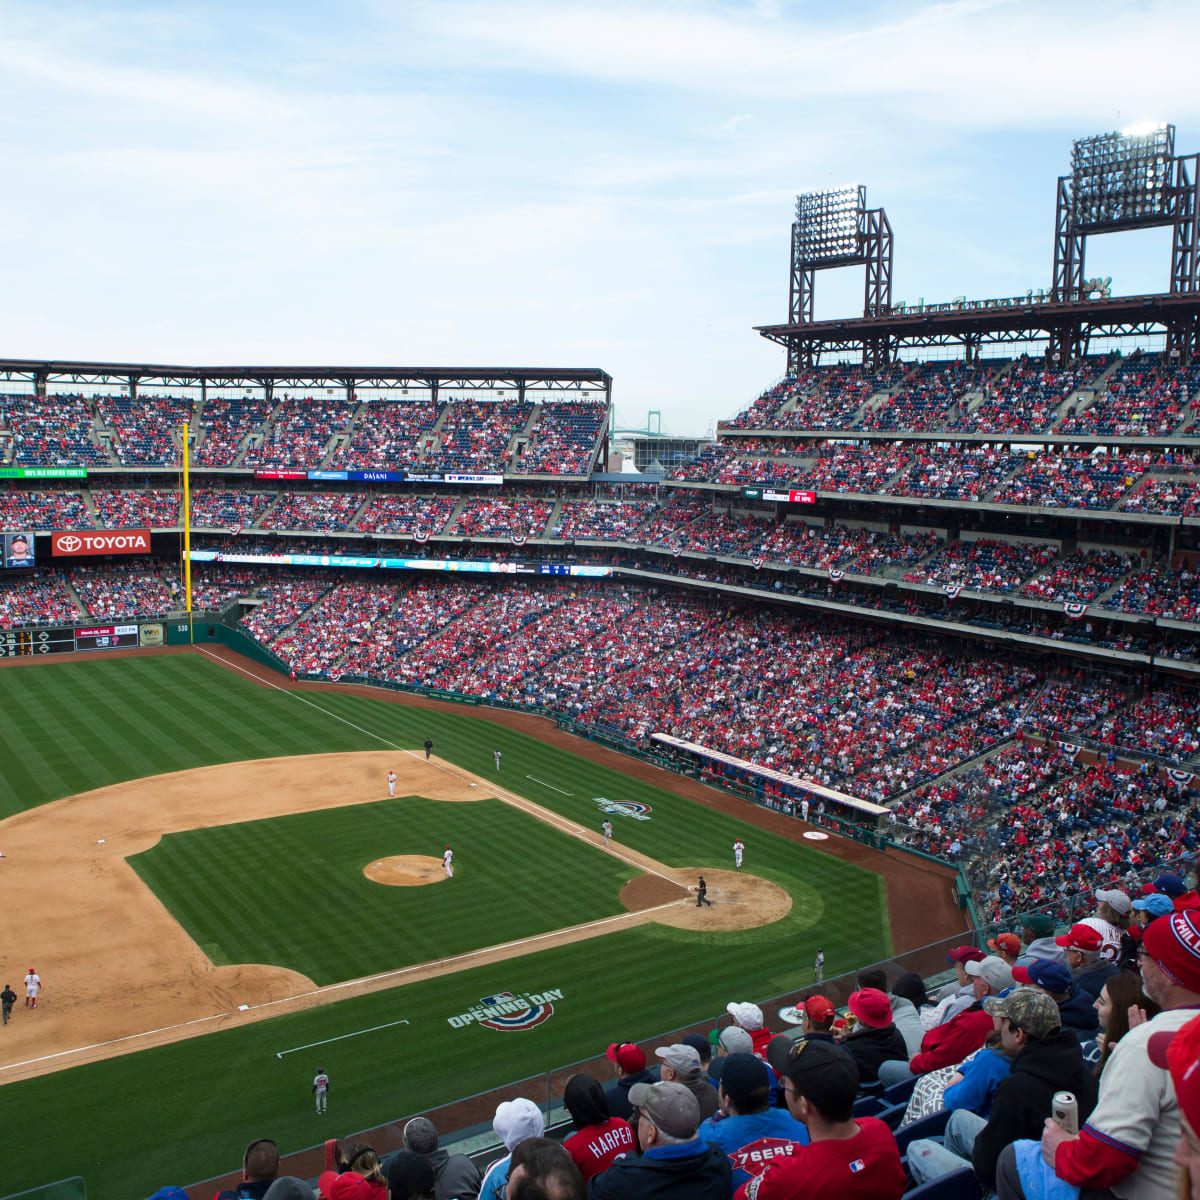 Citizens Bank Park: Home of the Phillies